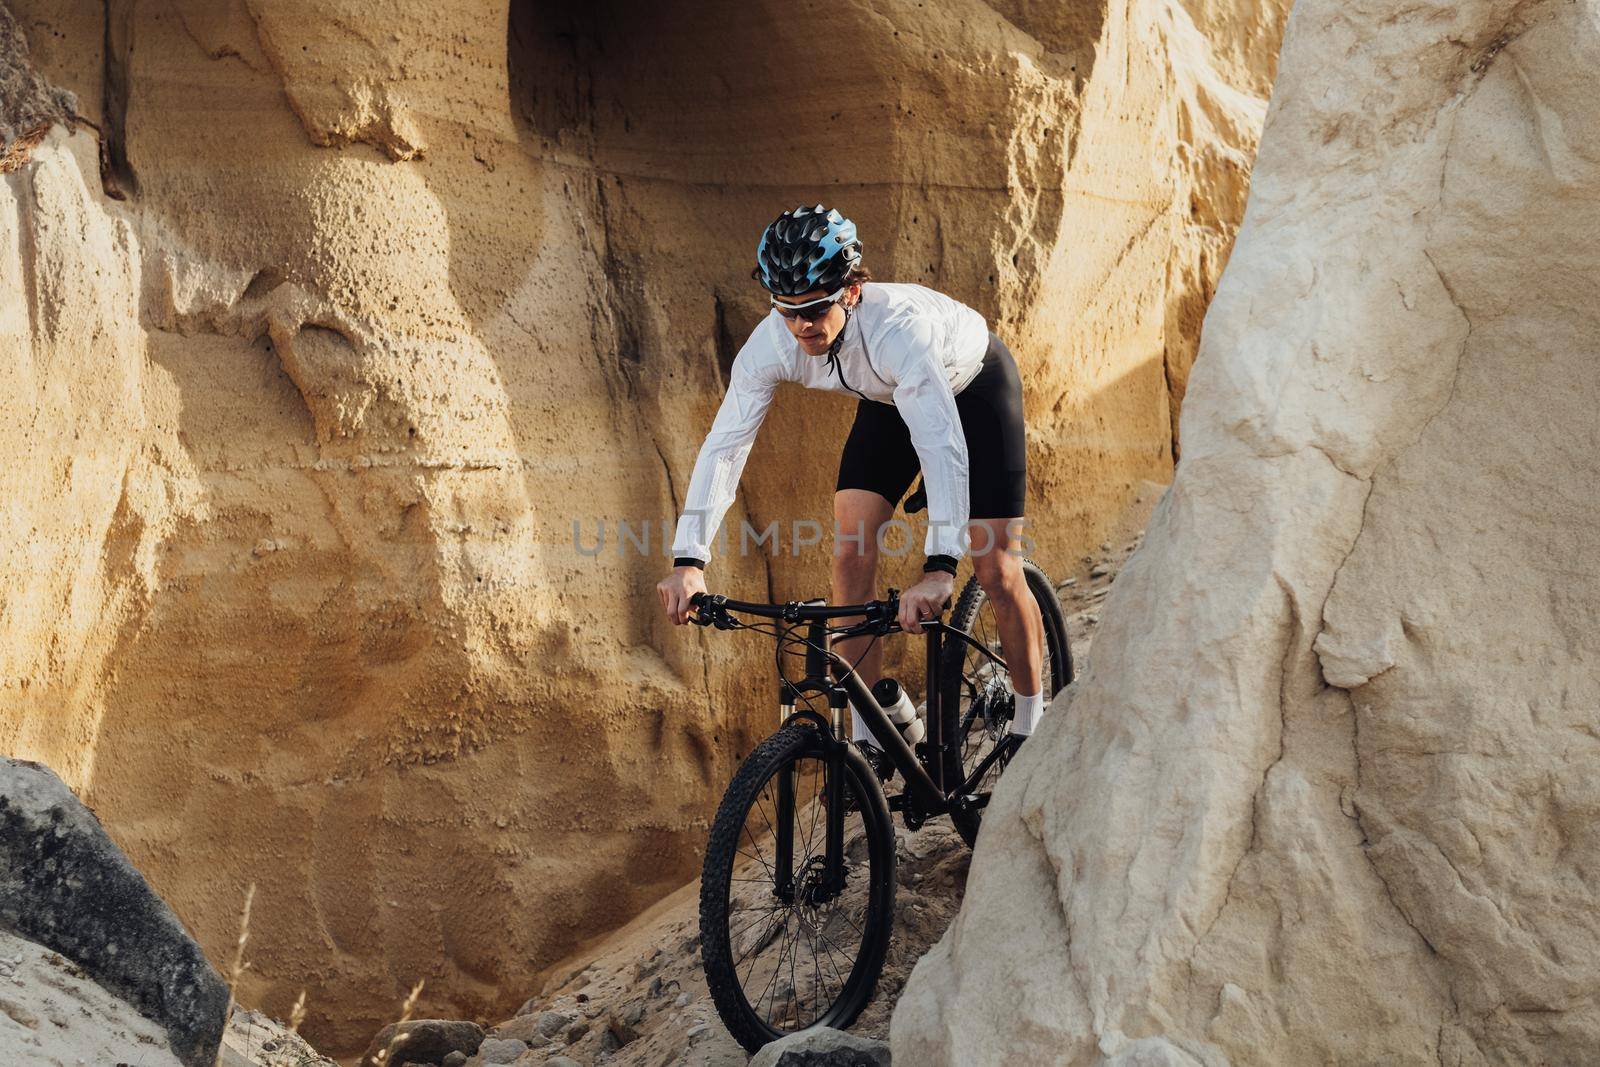 Adult Man Riding Bike Outdoors, Professional Equipped Cyclist on Trail with Giant Sandy Stones